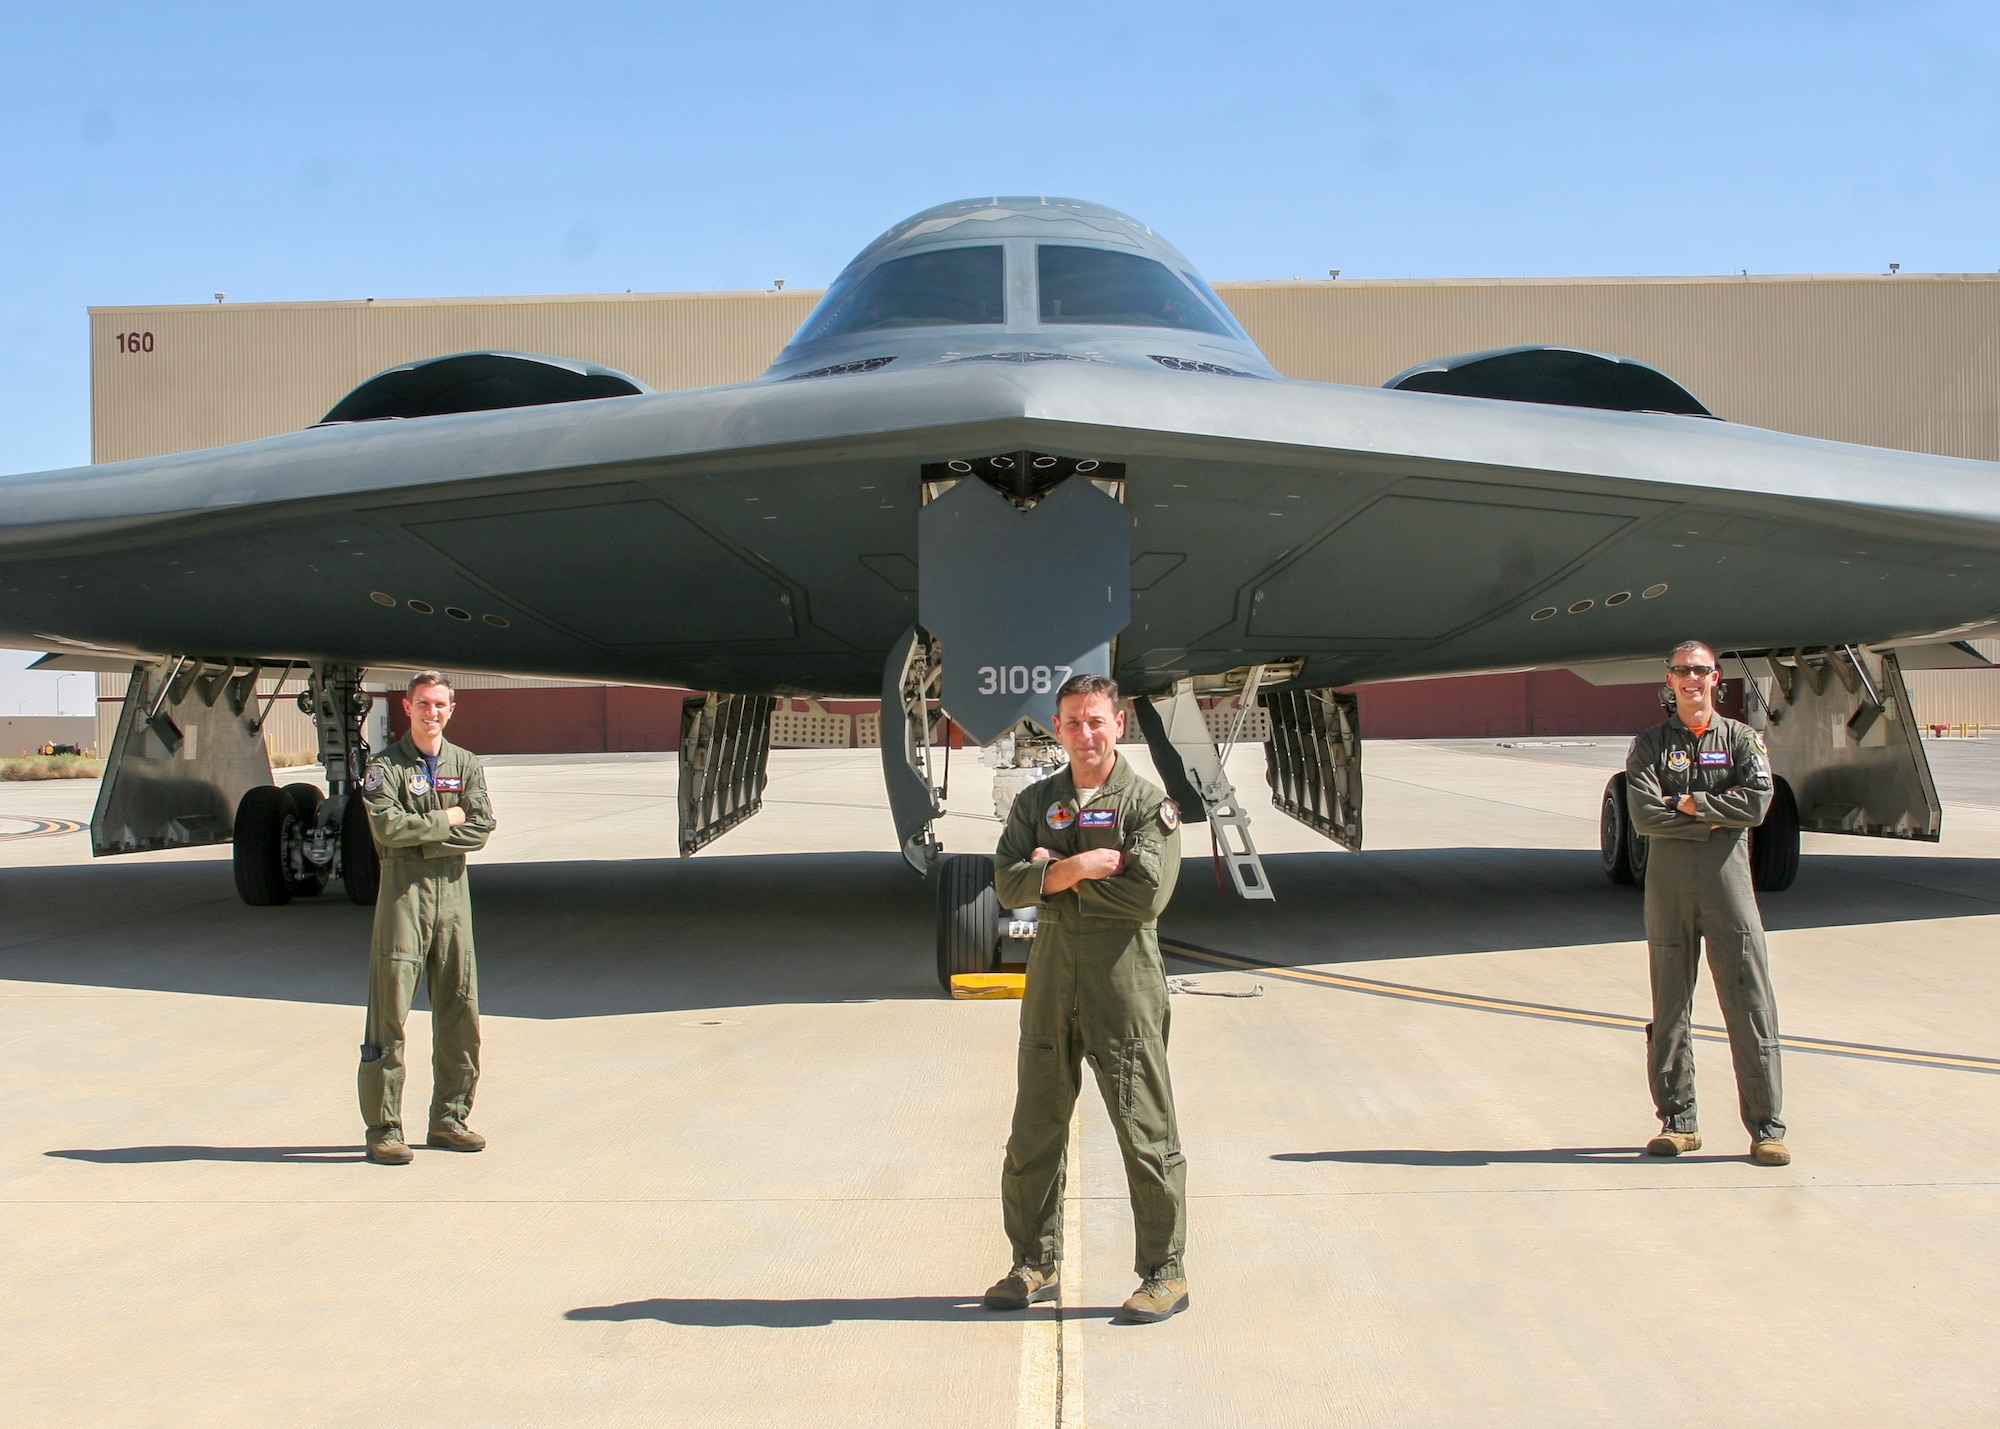 The 419th Flight Test Squadron's Maj. Matthew Gray, Jason DiGiacomo and Maj. Dustin Duke pose for a photo in front of the B-2 "Spirit of Pennsylvania" after it arrived to Edwards Air Force Base, California, Oct. 2. (Air Force photo by Kyle Brasier)